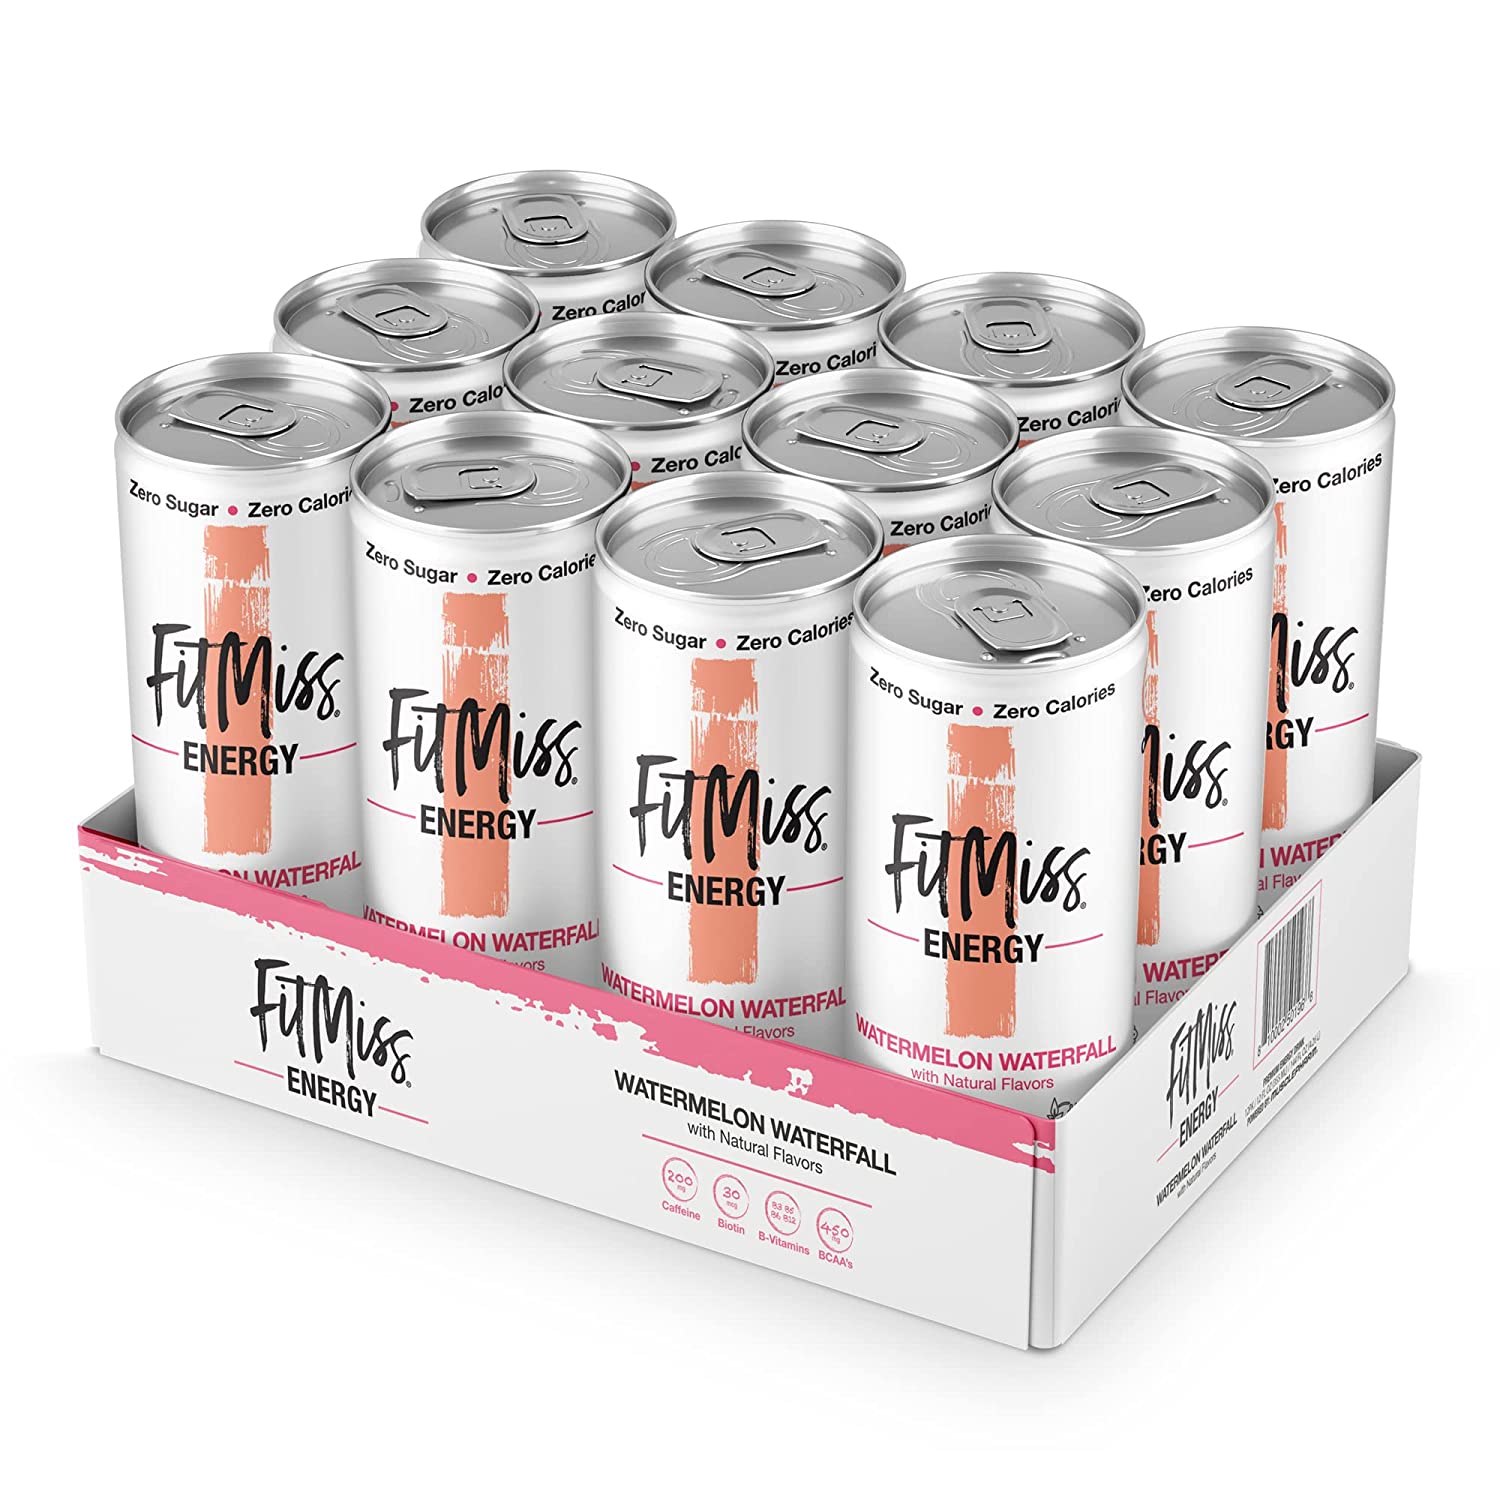 12-Pack 12-Oz MusclePharm FitMiss Sugar Free Energy Drink (various flavors) from $8.80 + Free Shipping w/ Prime or on orders over $25